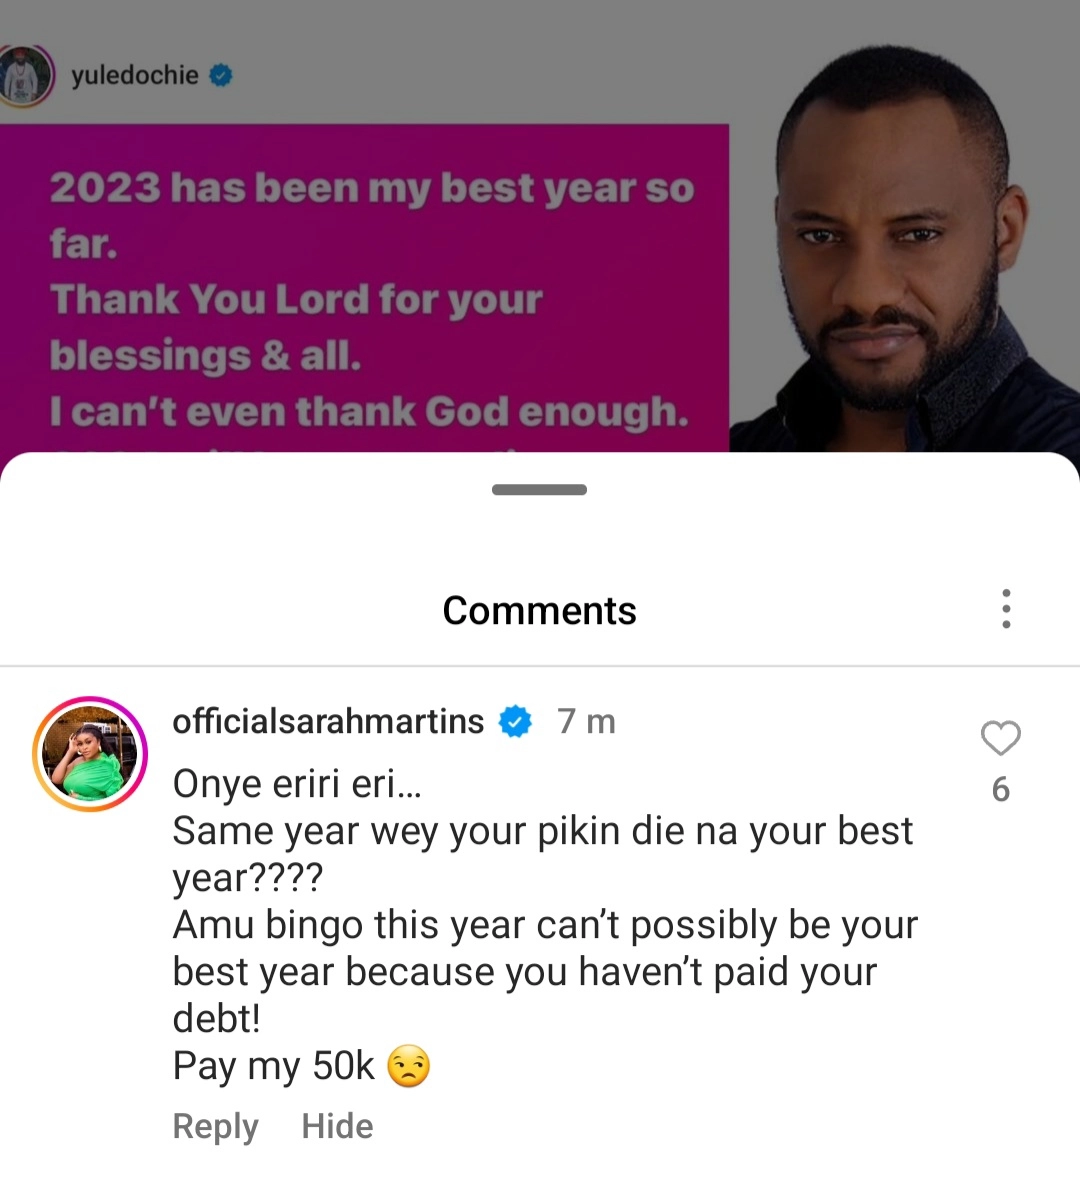 This Can't Possibly Be Your Best Year, Pay My 50k - Sarah Martins Slams Yul Edochie For Saying 2023 Is His Best Year